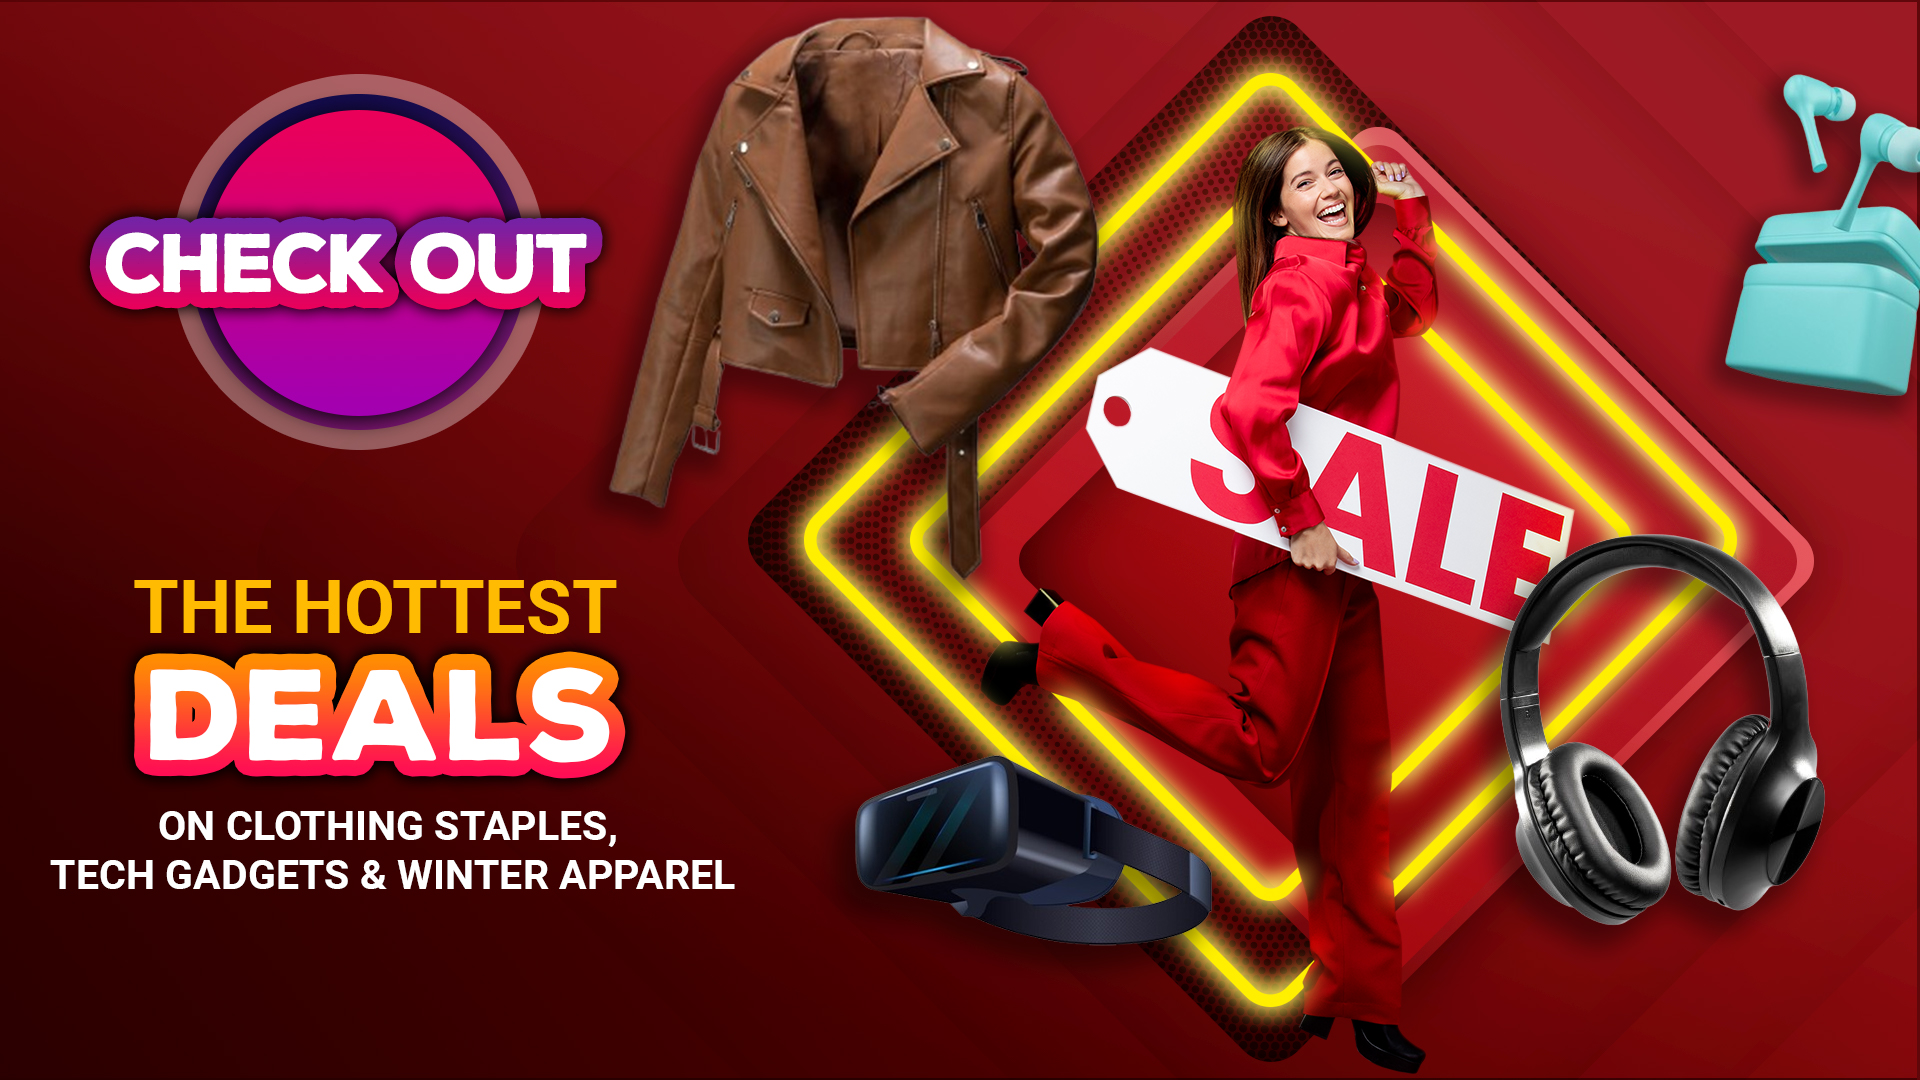 Check Out The Hottest Deals On Clothing Staples, Tech Gadgets & Winter Apparel